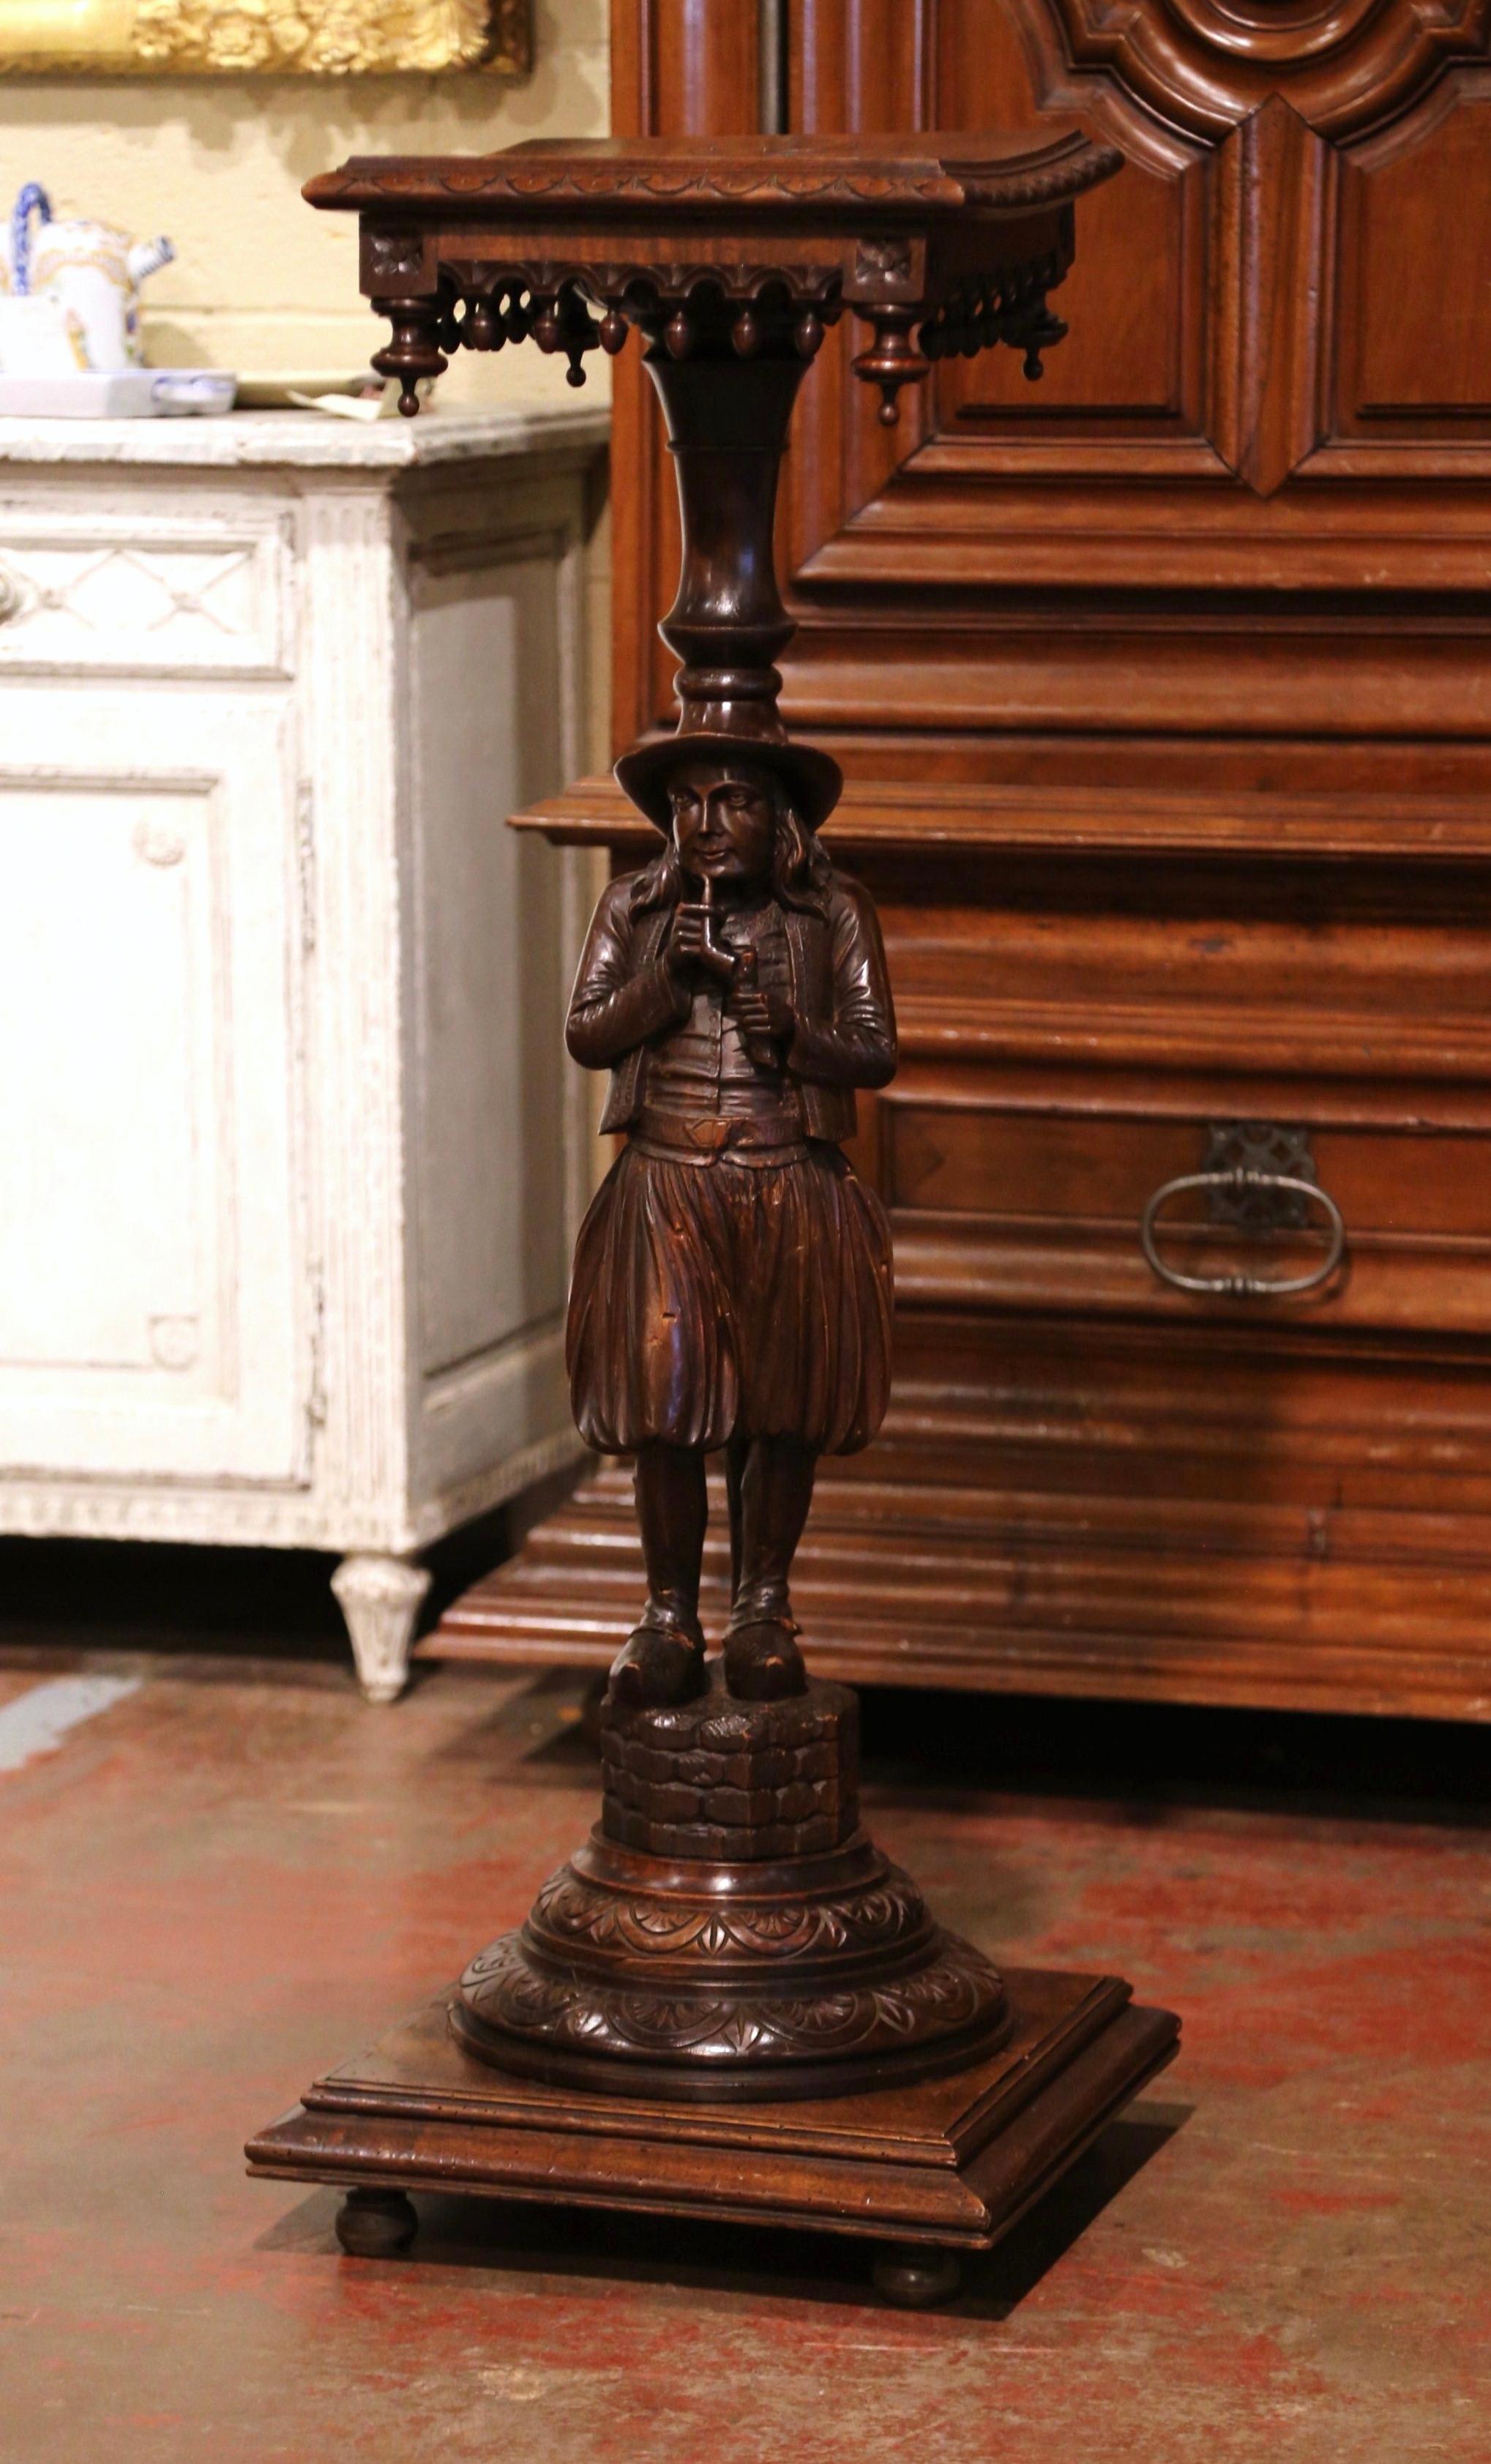 Hand-Carved 19th Century French Carved Chestnut Pedestal Table with Breton Man Figure